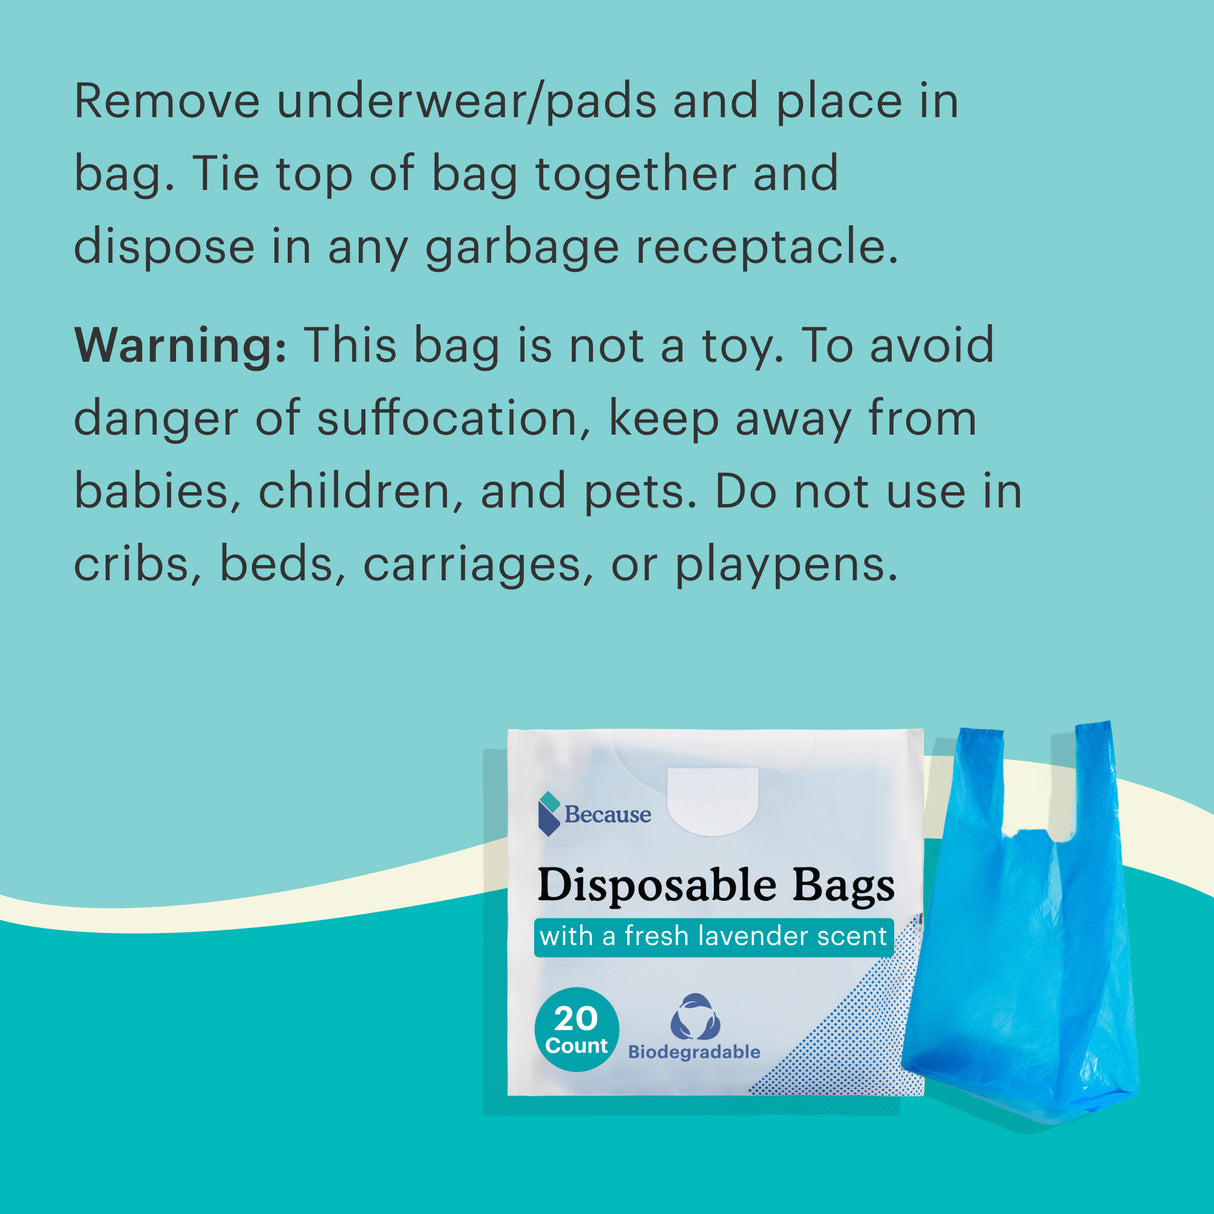 Remove underwear/pads and place in bag. Tie top of bag together and dispose in any garbage receptacle. Warning: This bag is not a toy. To avoid danger of suffocation, keep away from babies, children, and pets. Do not use in cribs, beds, carriages, or playpens.